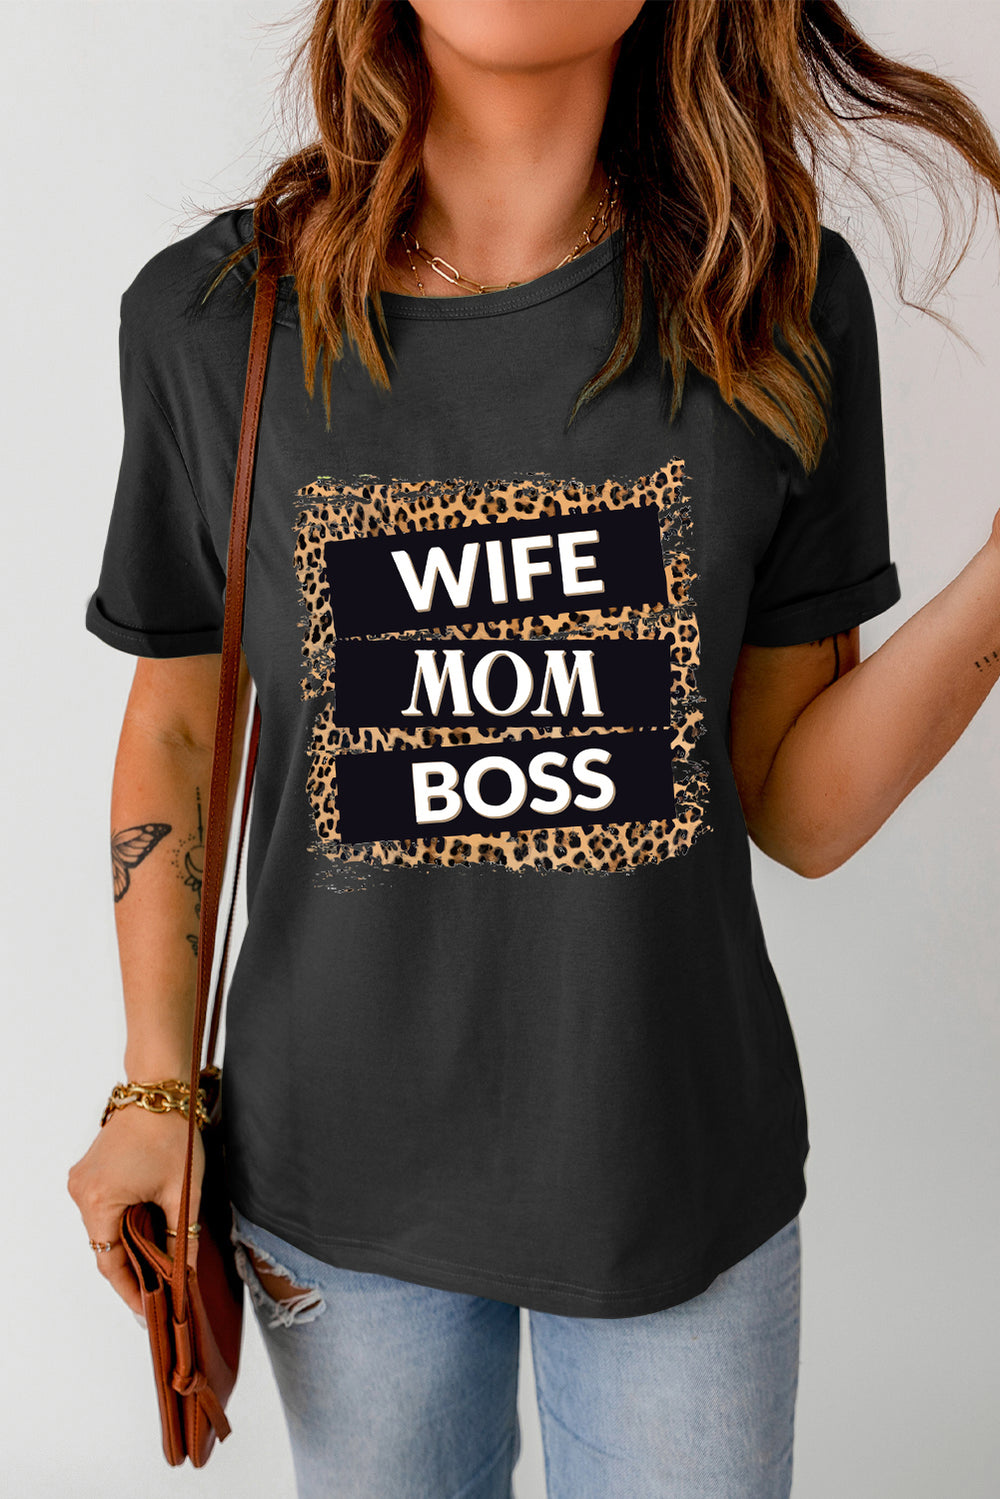 WIFE MOM BOSS Leopard Graphic Tee - Cheeky Chic Boutique